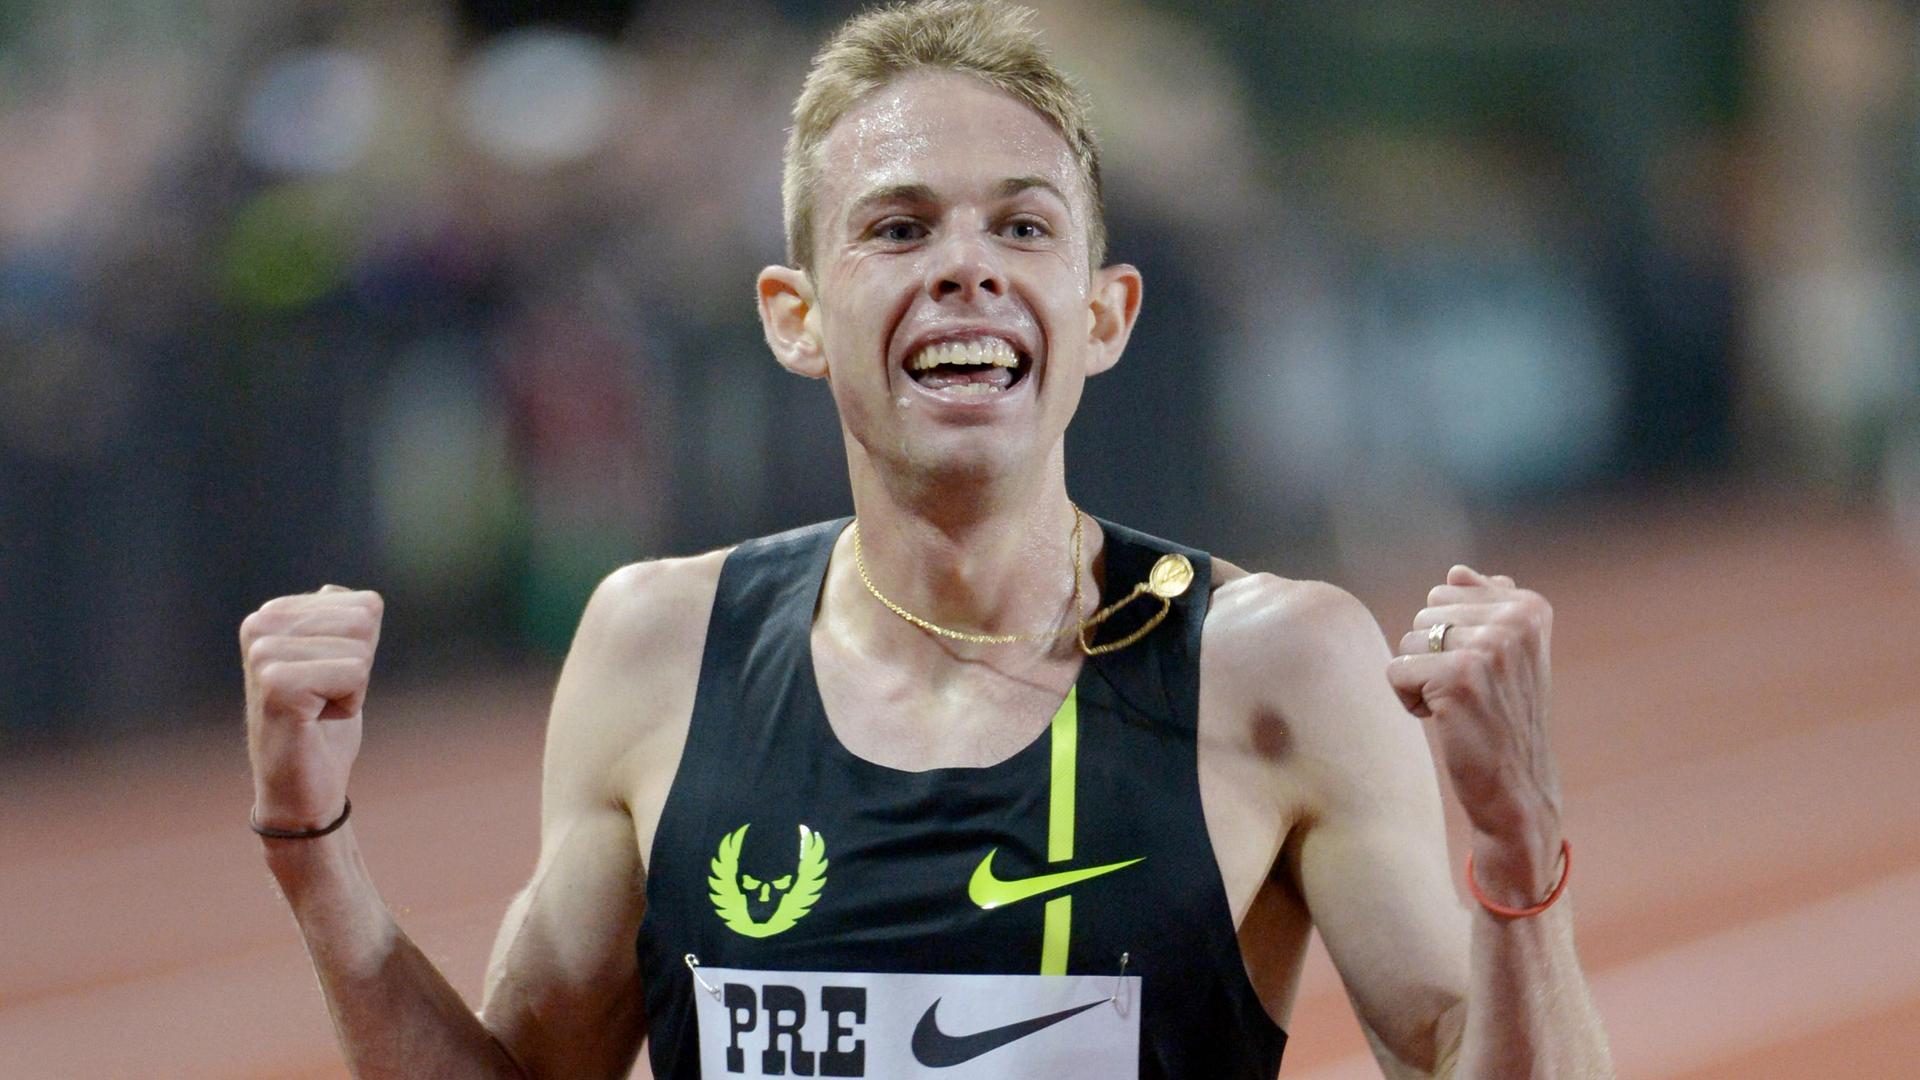 Galen Rupp (USA) celebrates after winning the 10,000m in an American record 26:44.36 in the 40th Prefontaine Classic at Hayward Field in Eugene, OR, on May 30, 2014.